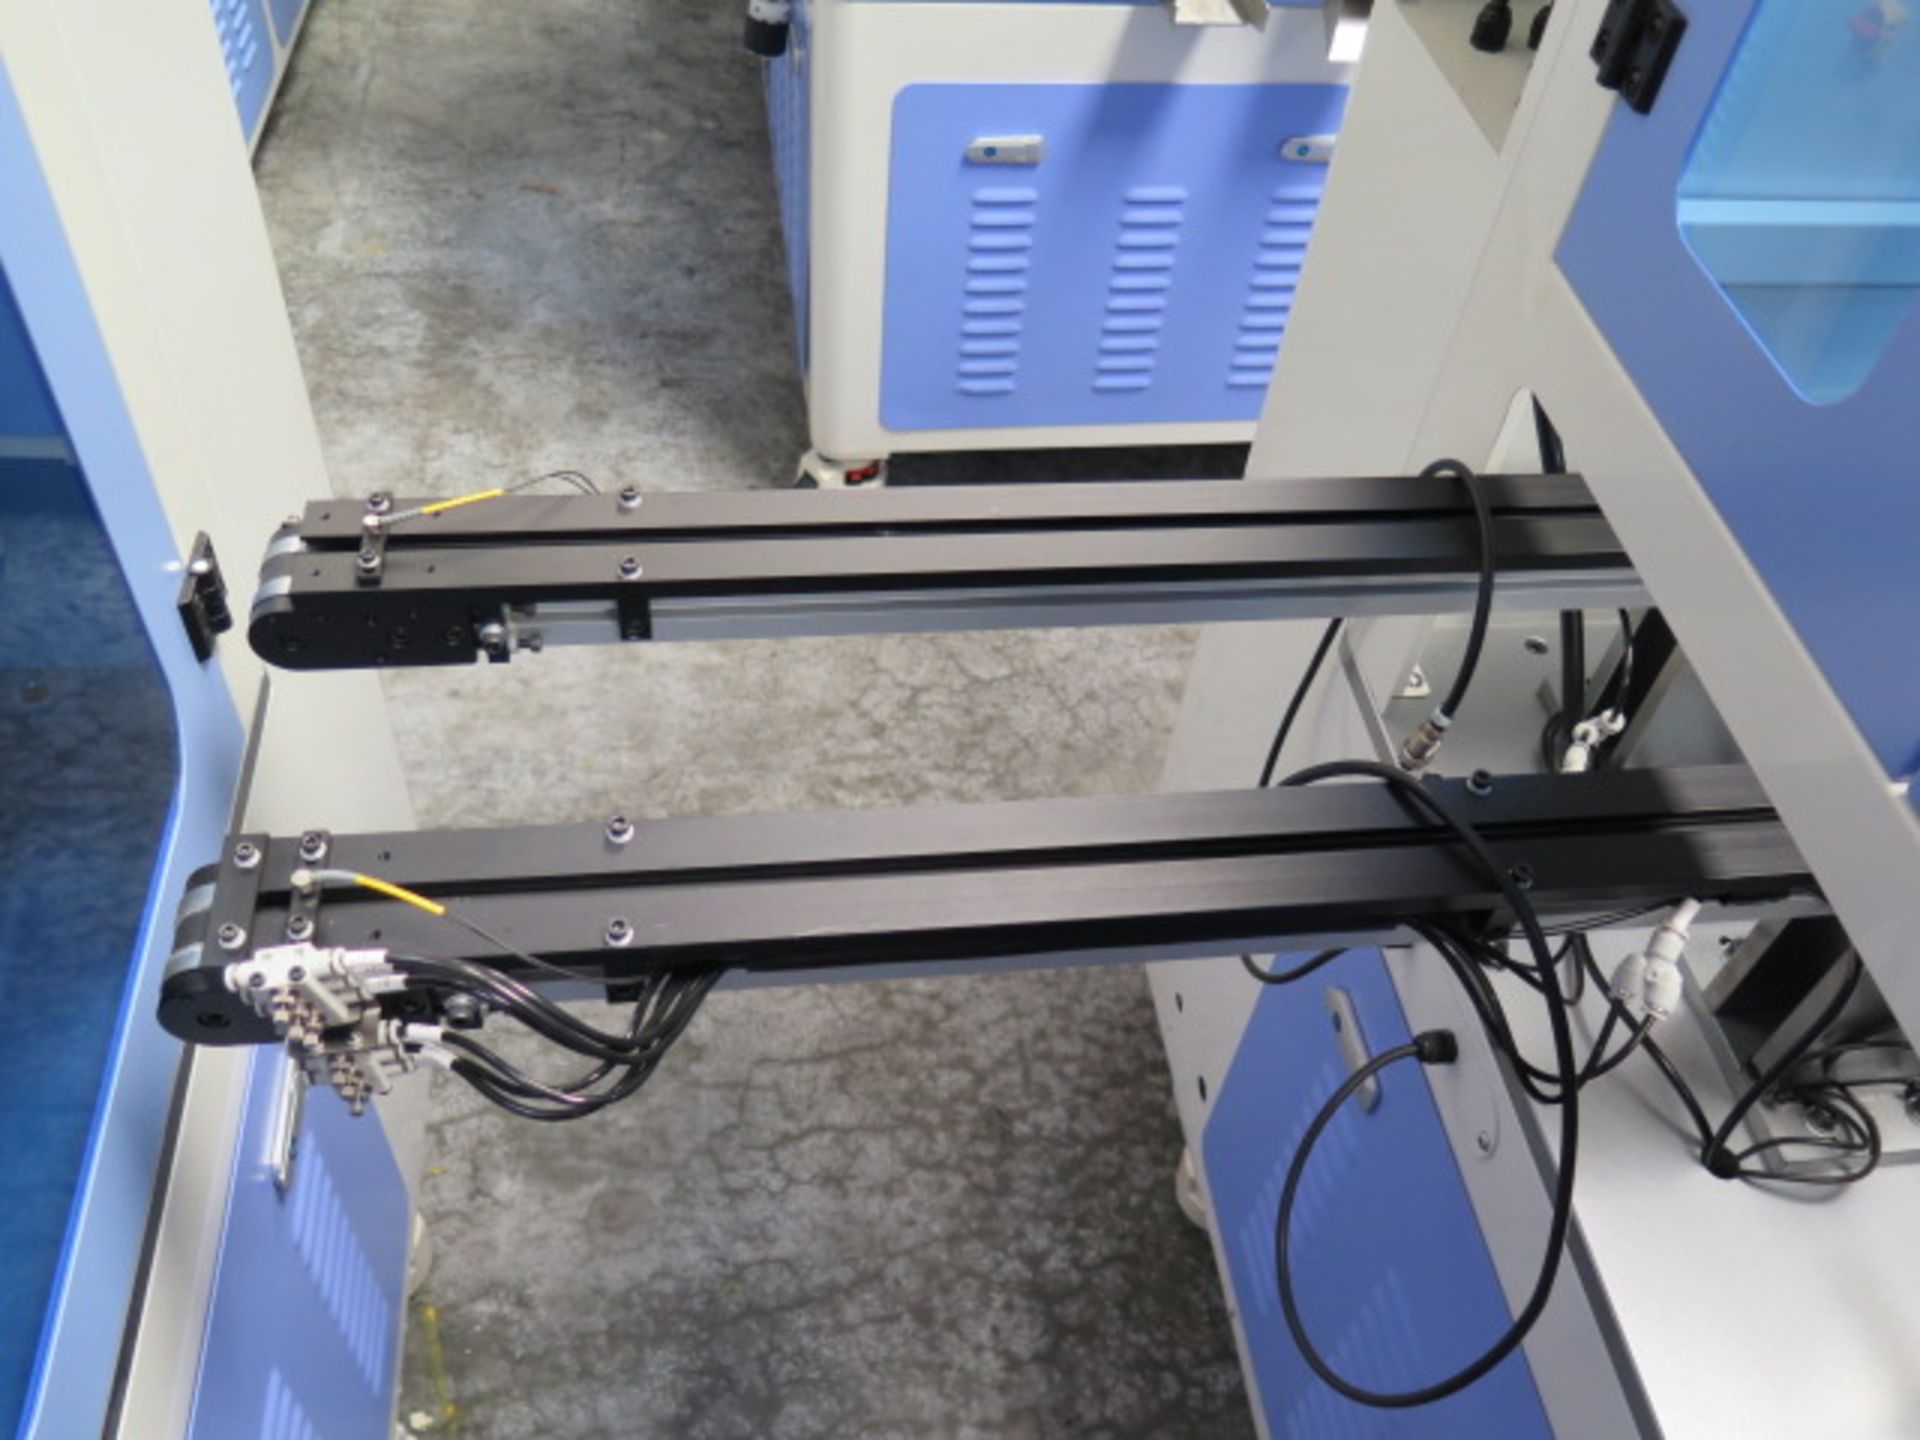 2021 Gereke mdl. GRK-TWO1 Cassette Assembly and Packaging Line w/ PLC Controllers, SOLD AS IS - Image 15 of 17